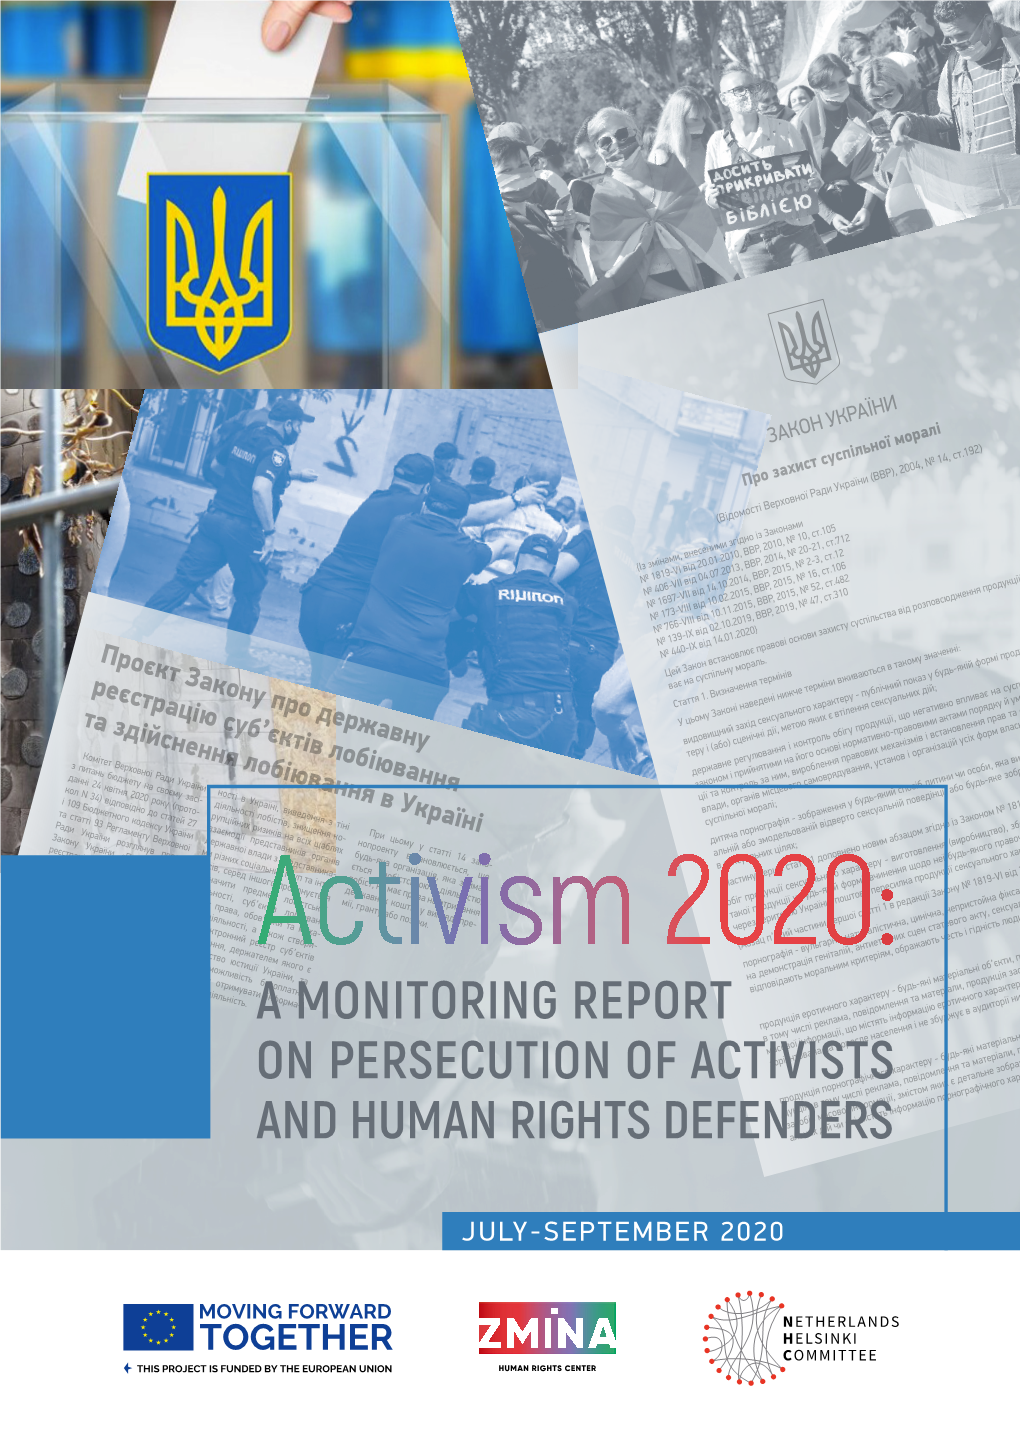 Activism 2020: a Monitoring Report on Persecution of Activists and Human Rights Defenders in the Government-Controlled Territory of Ukraine (July-September 2020) / A